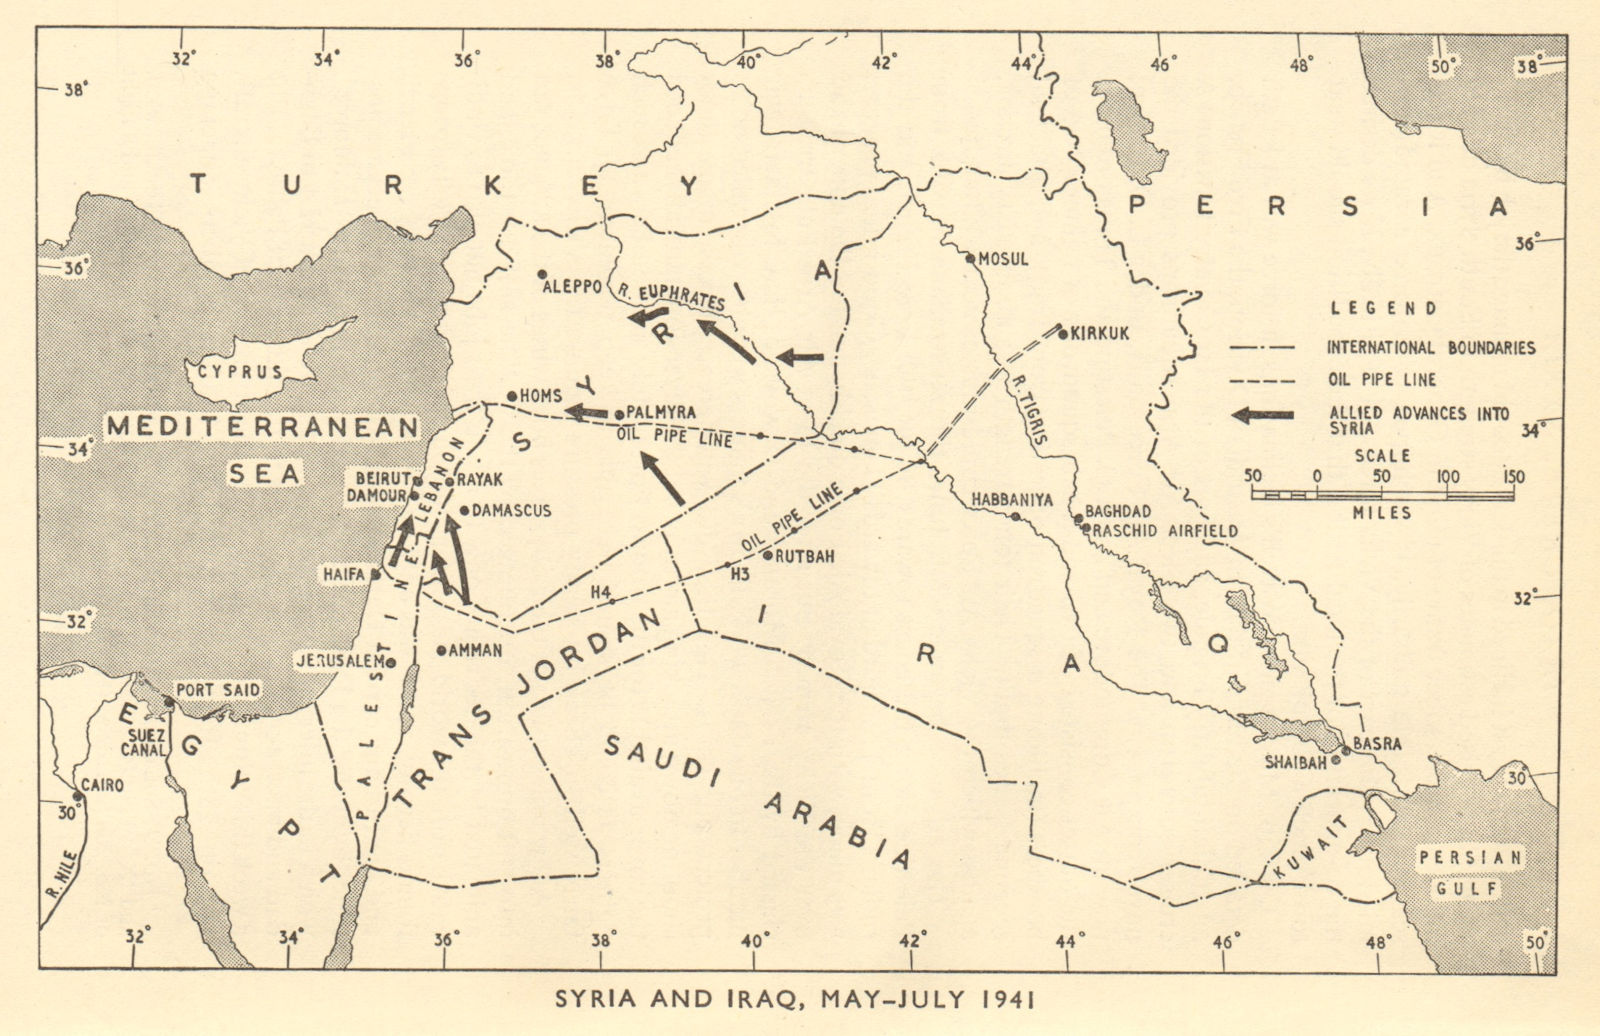 Syria & Iraq, May-July 1941. World War 2. Oil pipelines. Allied advance 1953 map